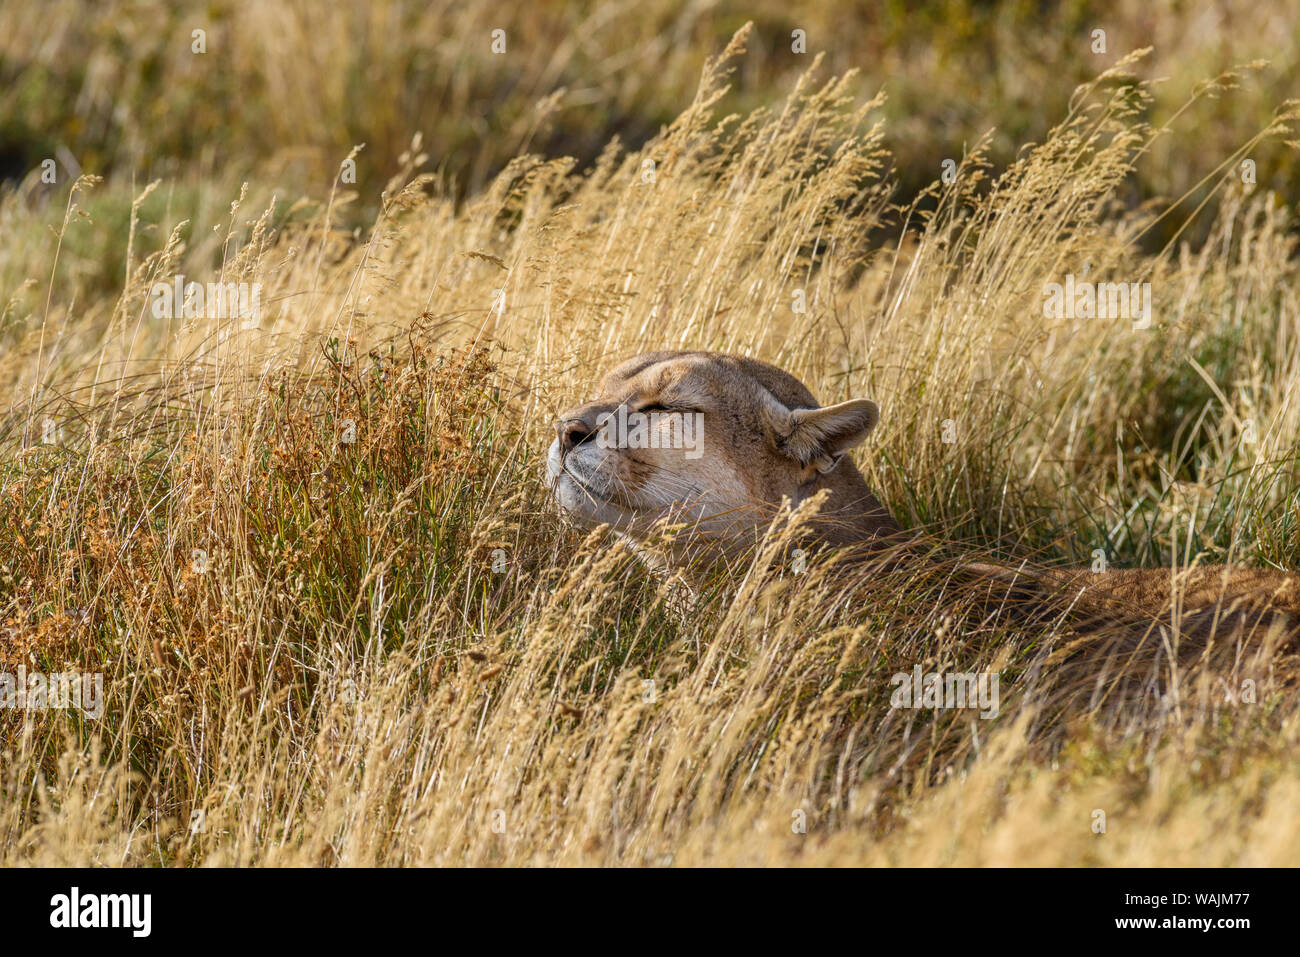 Chile, Torres del Paine National Park. Puma sits relaxed in tall grass. Stock Photo